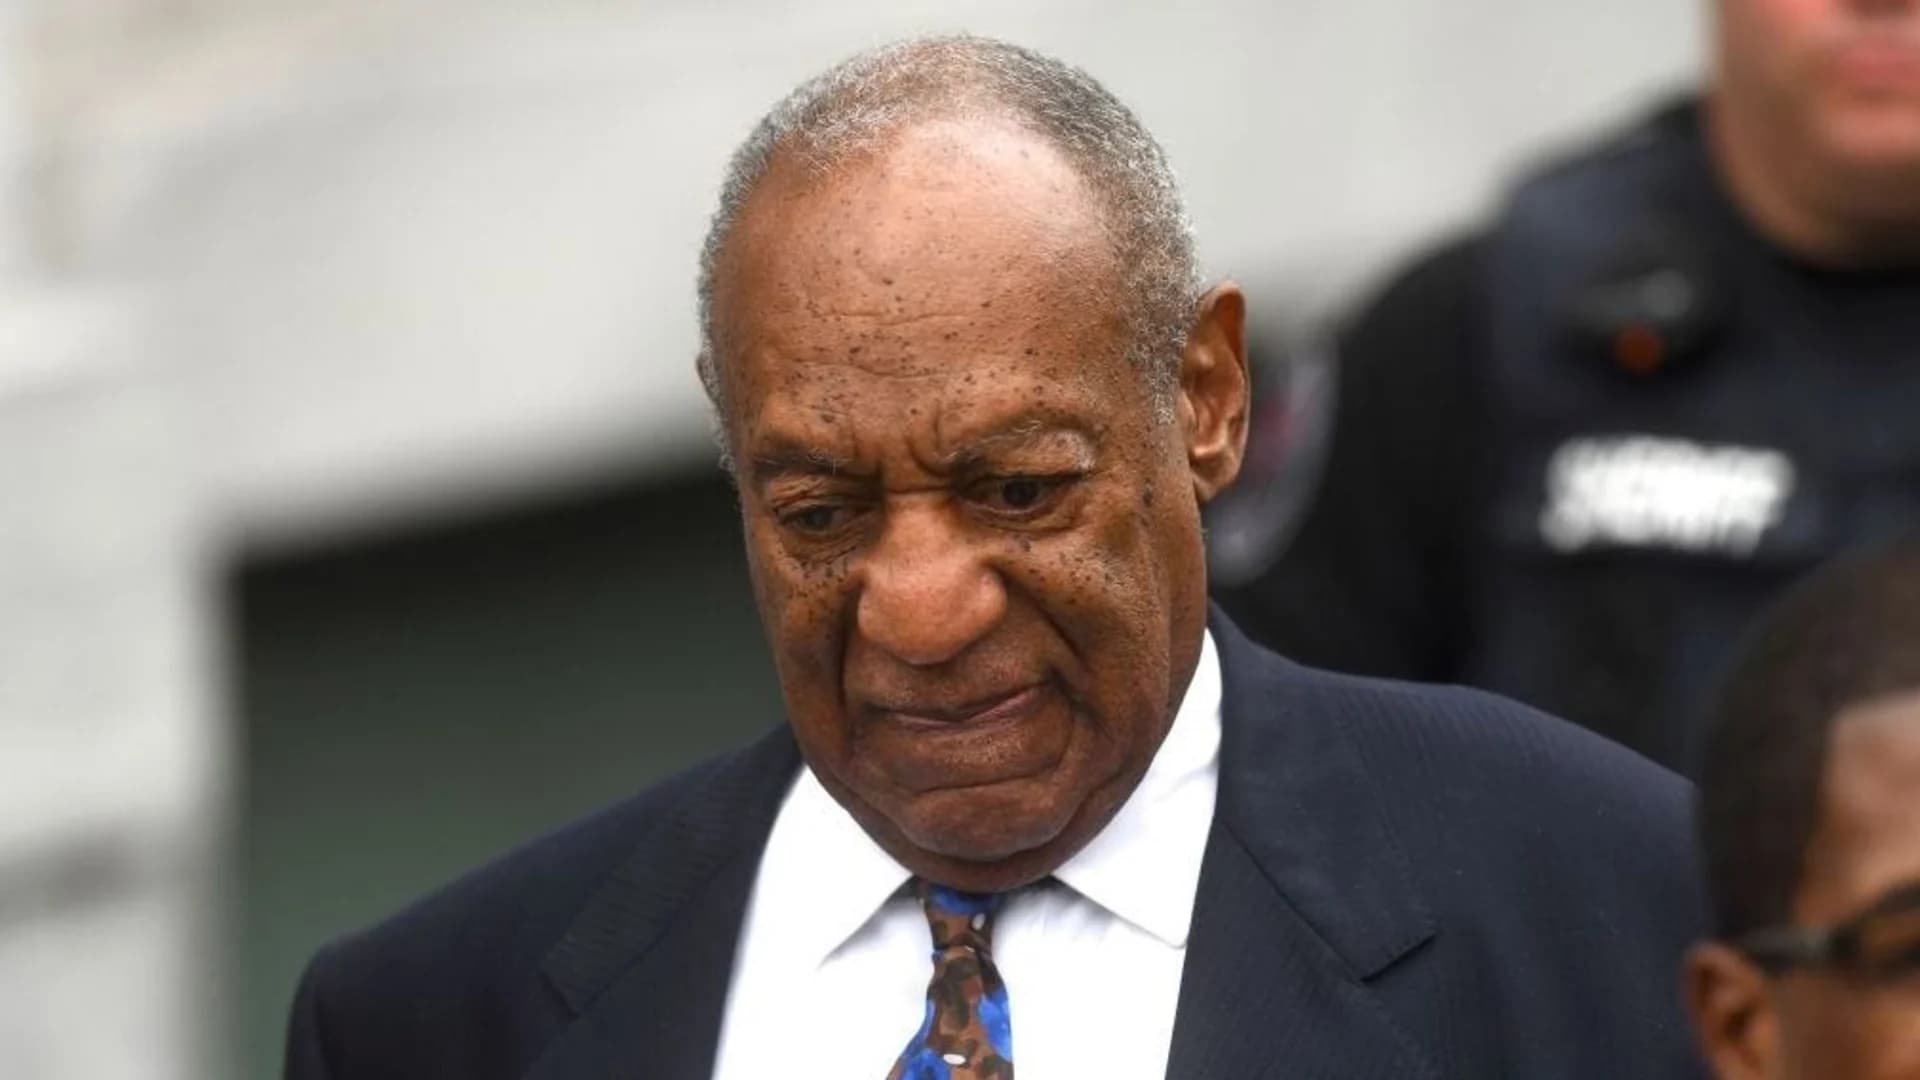 Bill Cosby sentenced to 3 to 10 years in prison in sex case